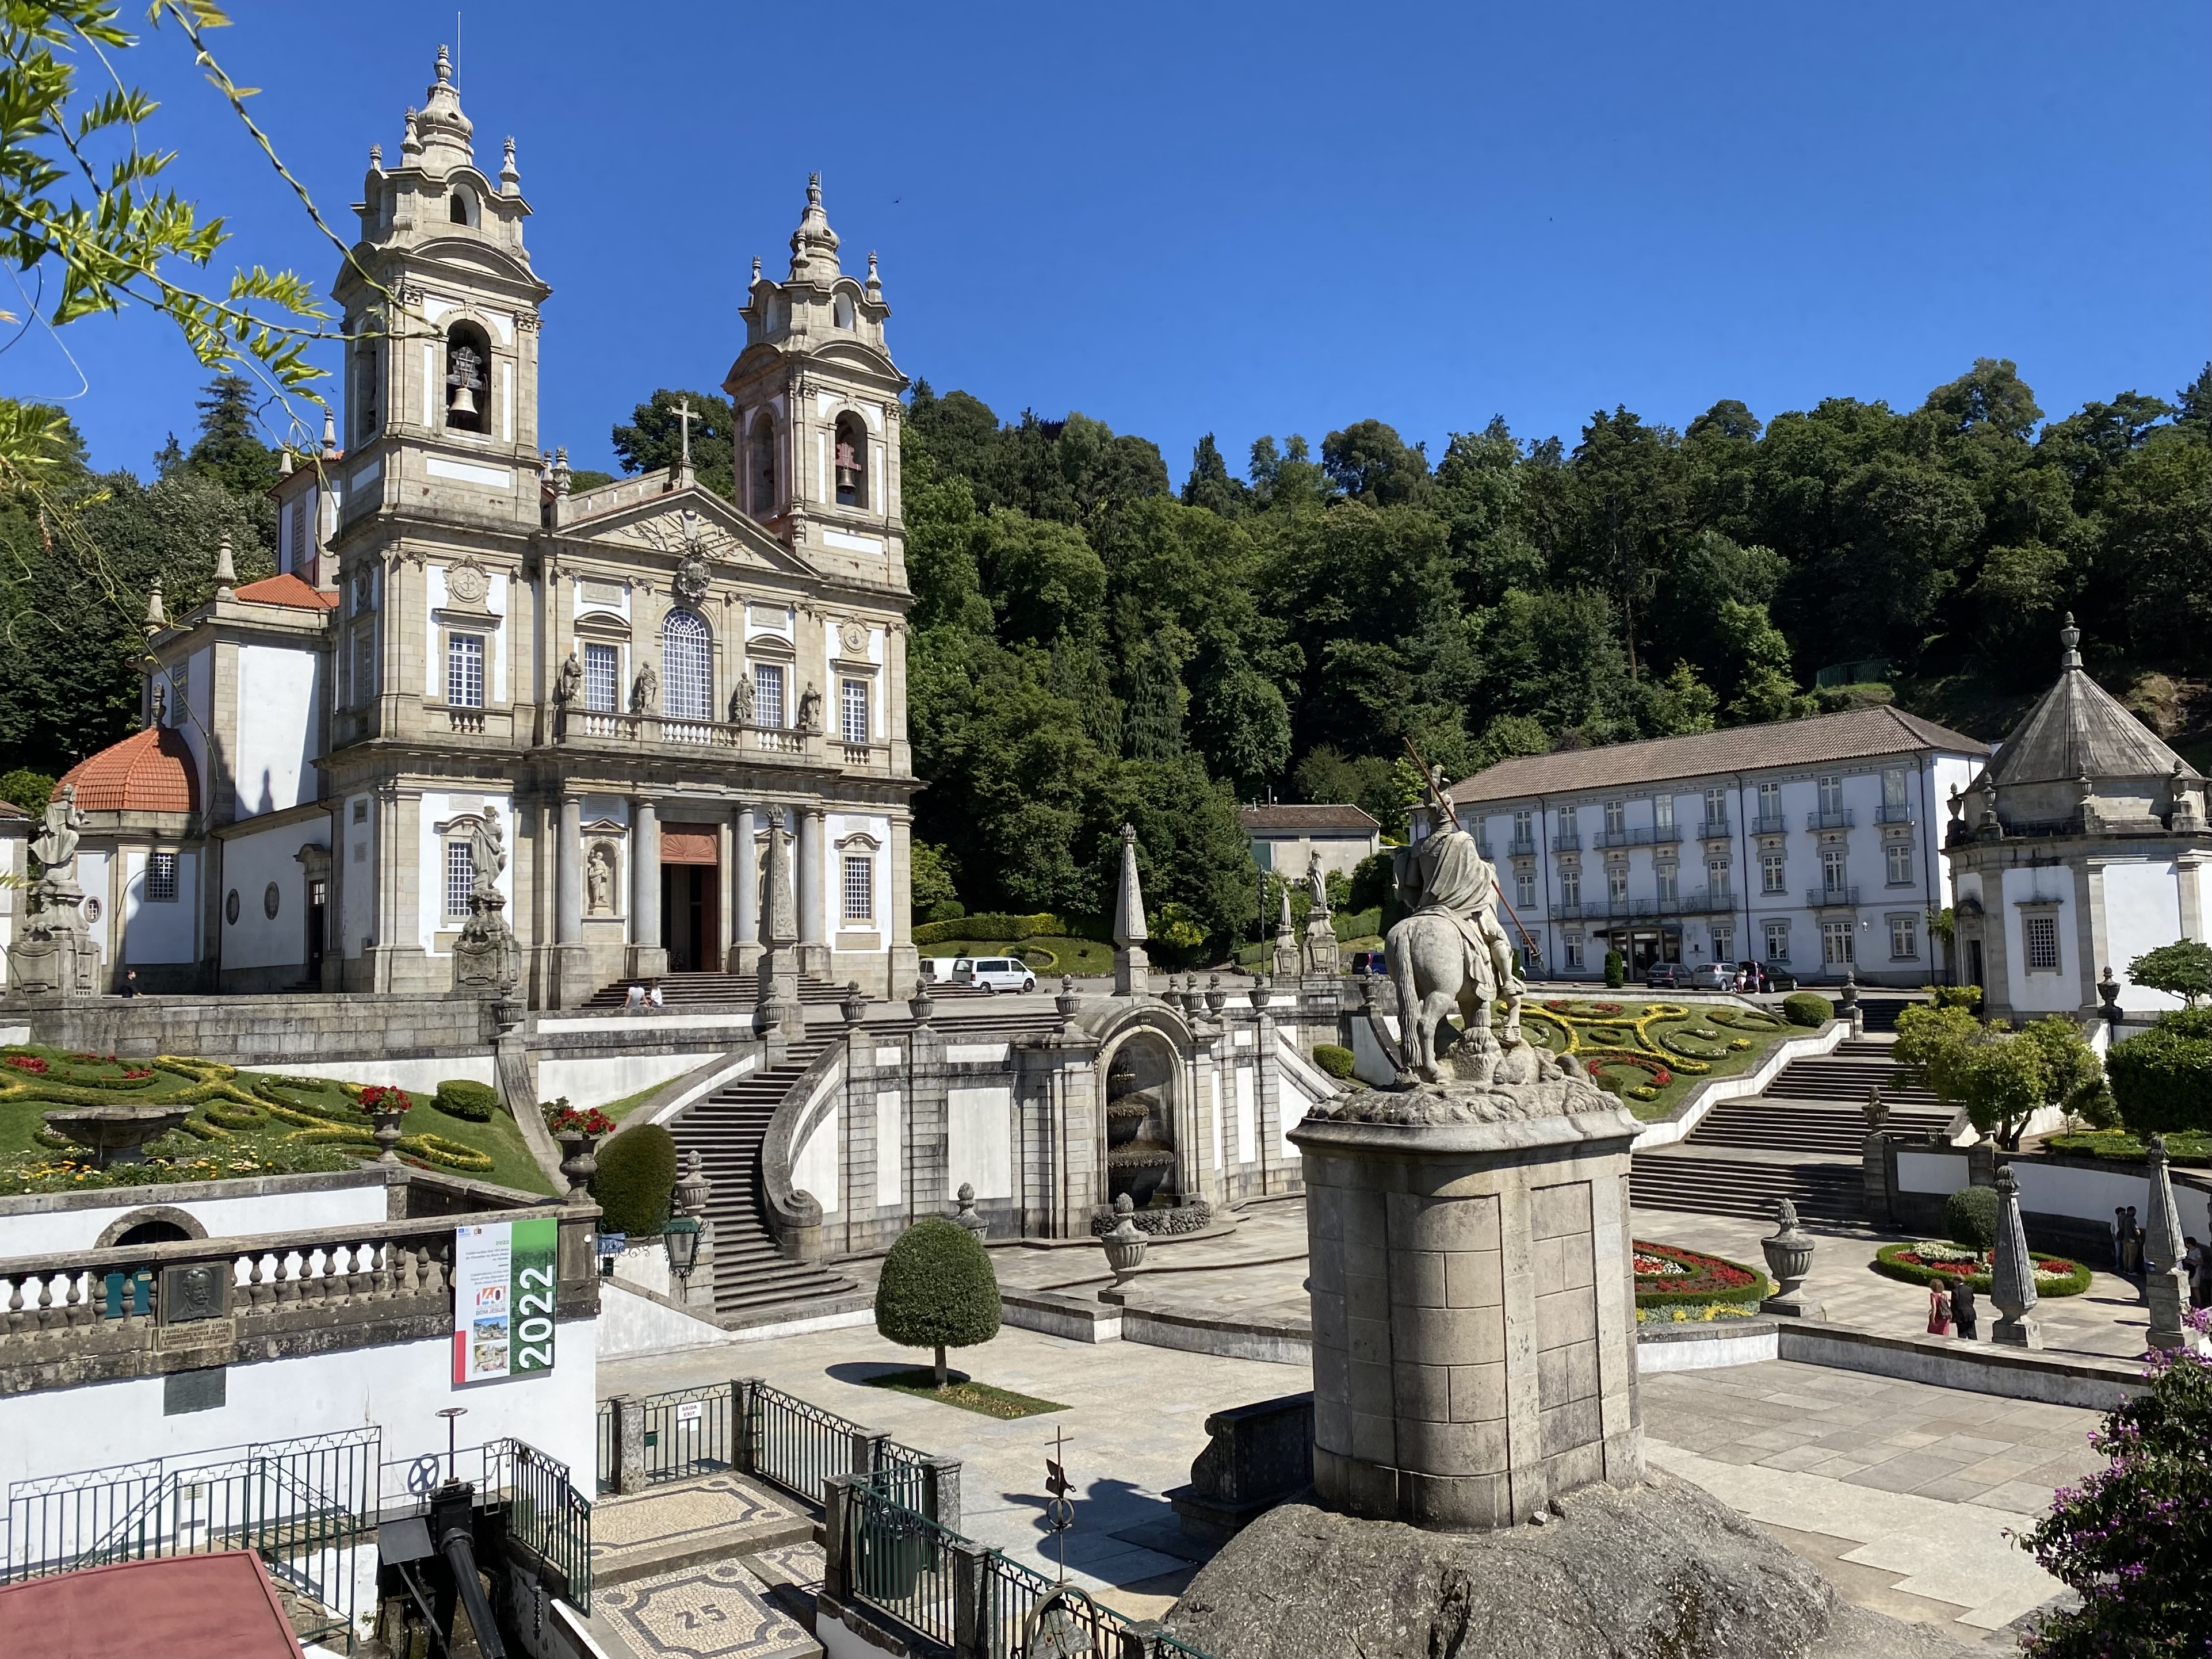 Catholic cathedral with plaza in front containing statues, manicured gardens, and steps